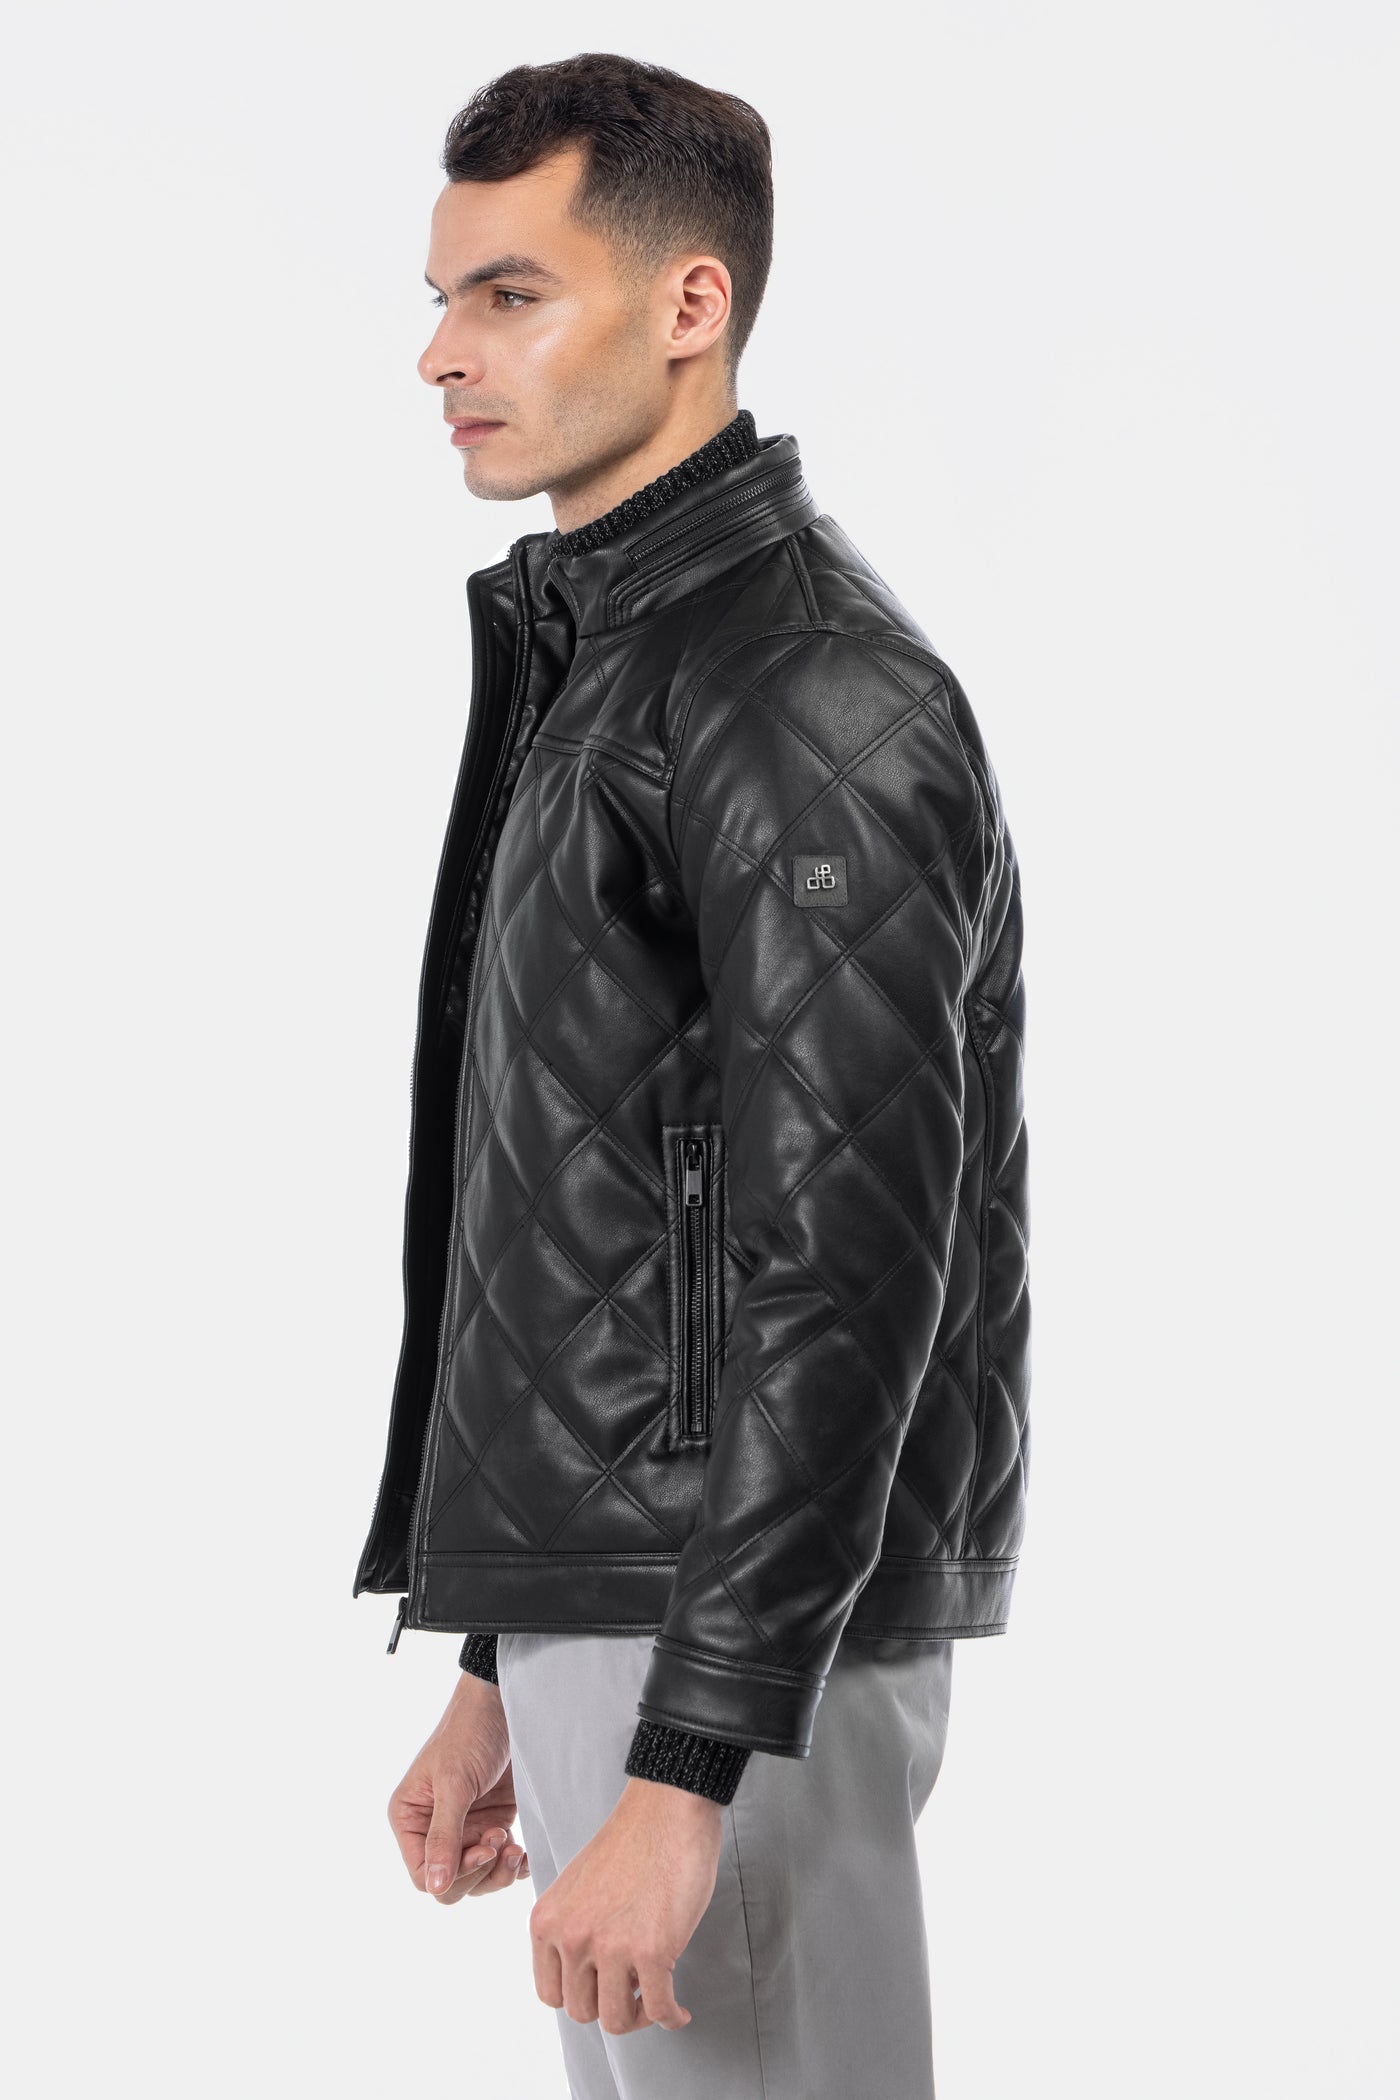 Quilted Black Leather Jacket